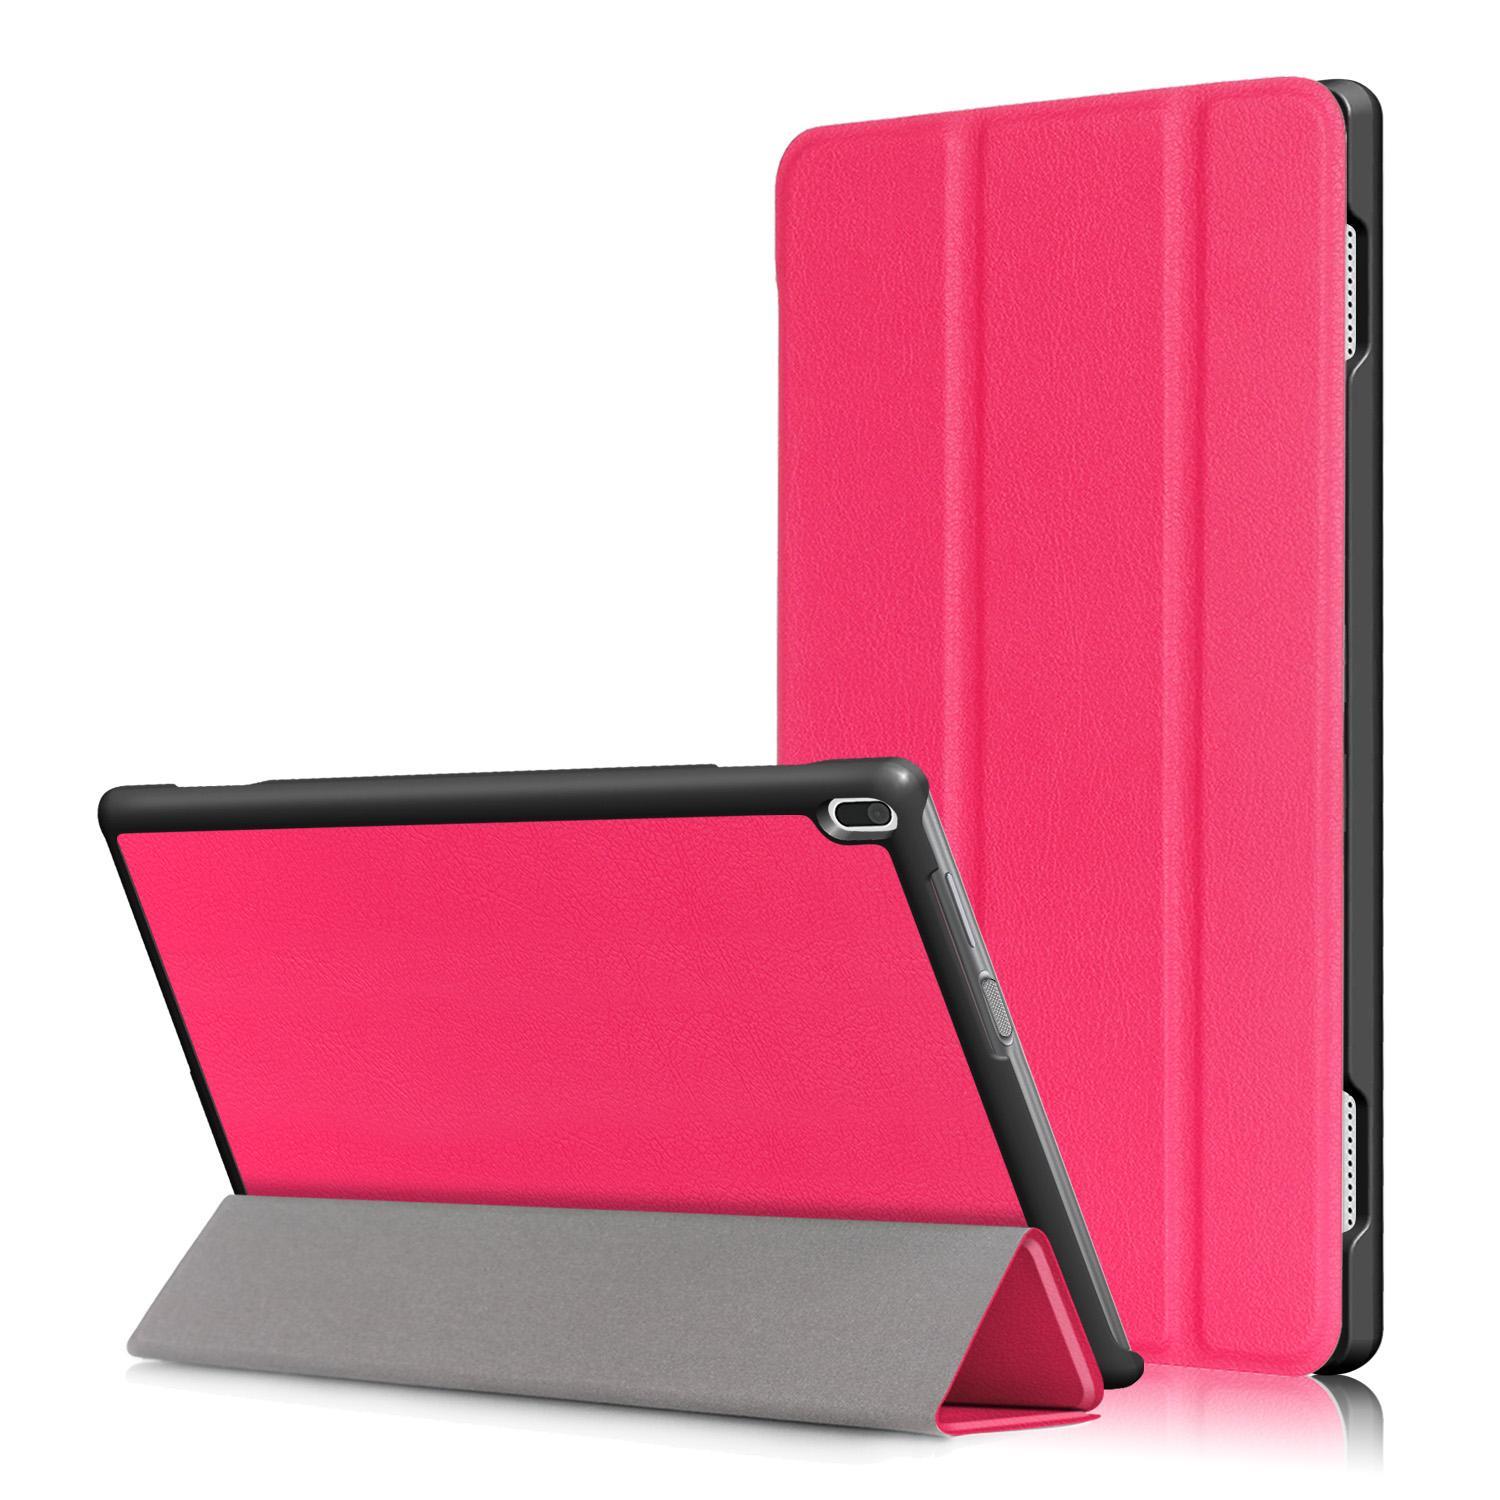 MCC For Lenovo Tab 4 10" Tablet Smart Leather Case Cover TB-X304 F/N Tab4 inch [Magenta]